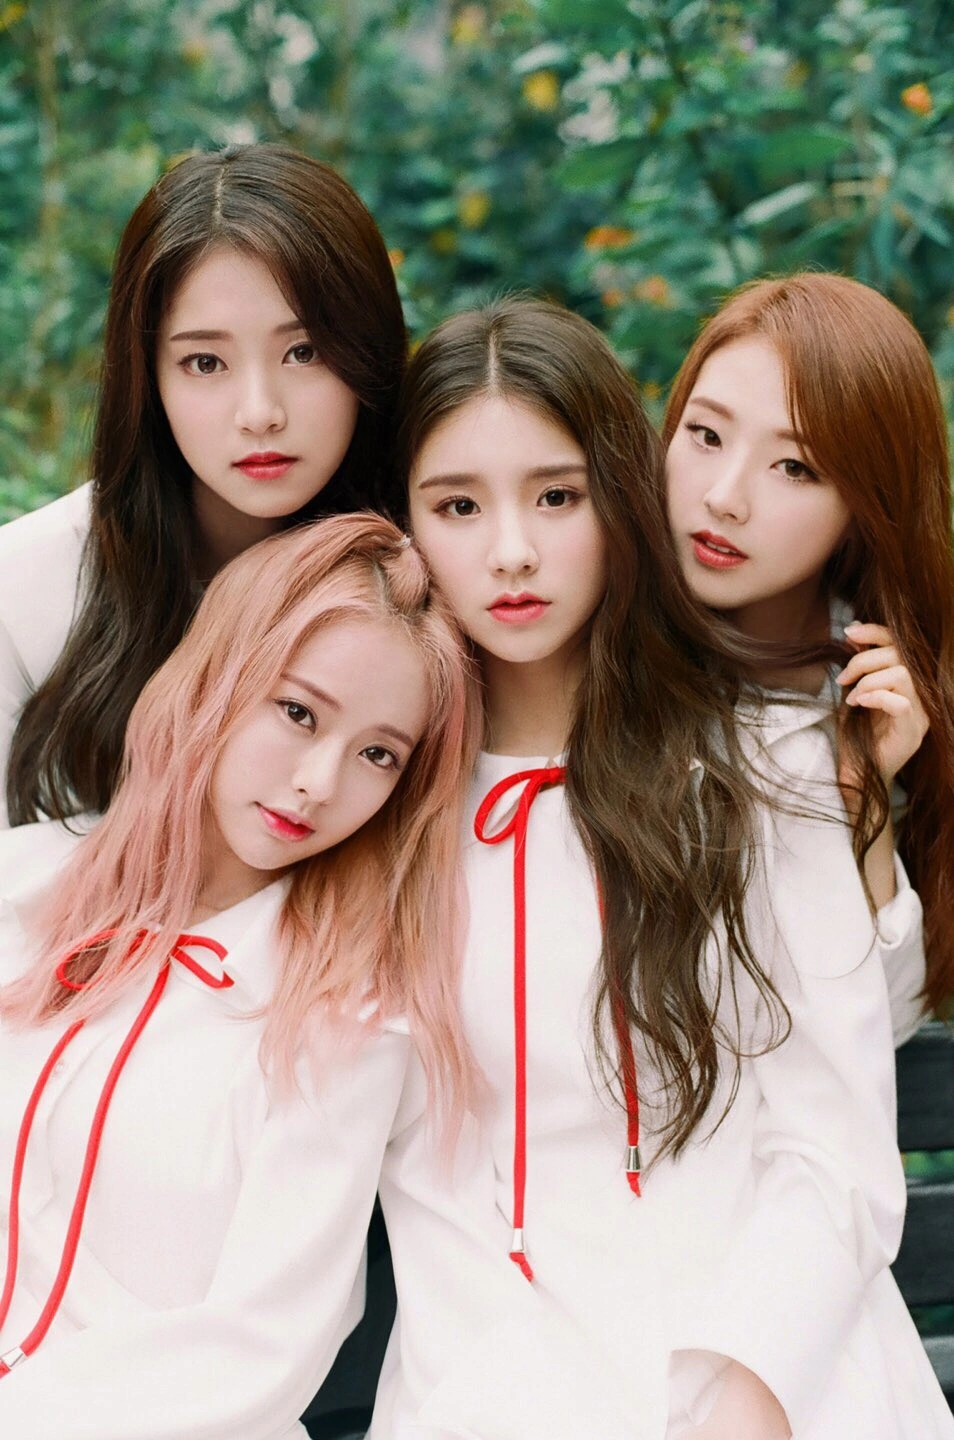 Loona 1/3 Love & Live Group Concept Teaser Picture Image Photo Kpop K-Concept 4